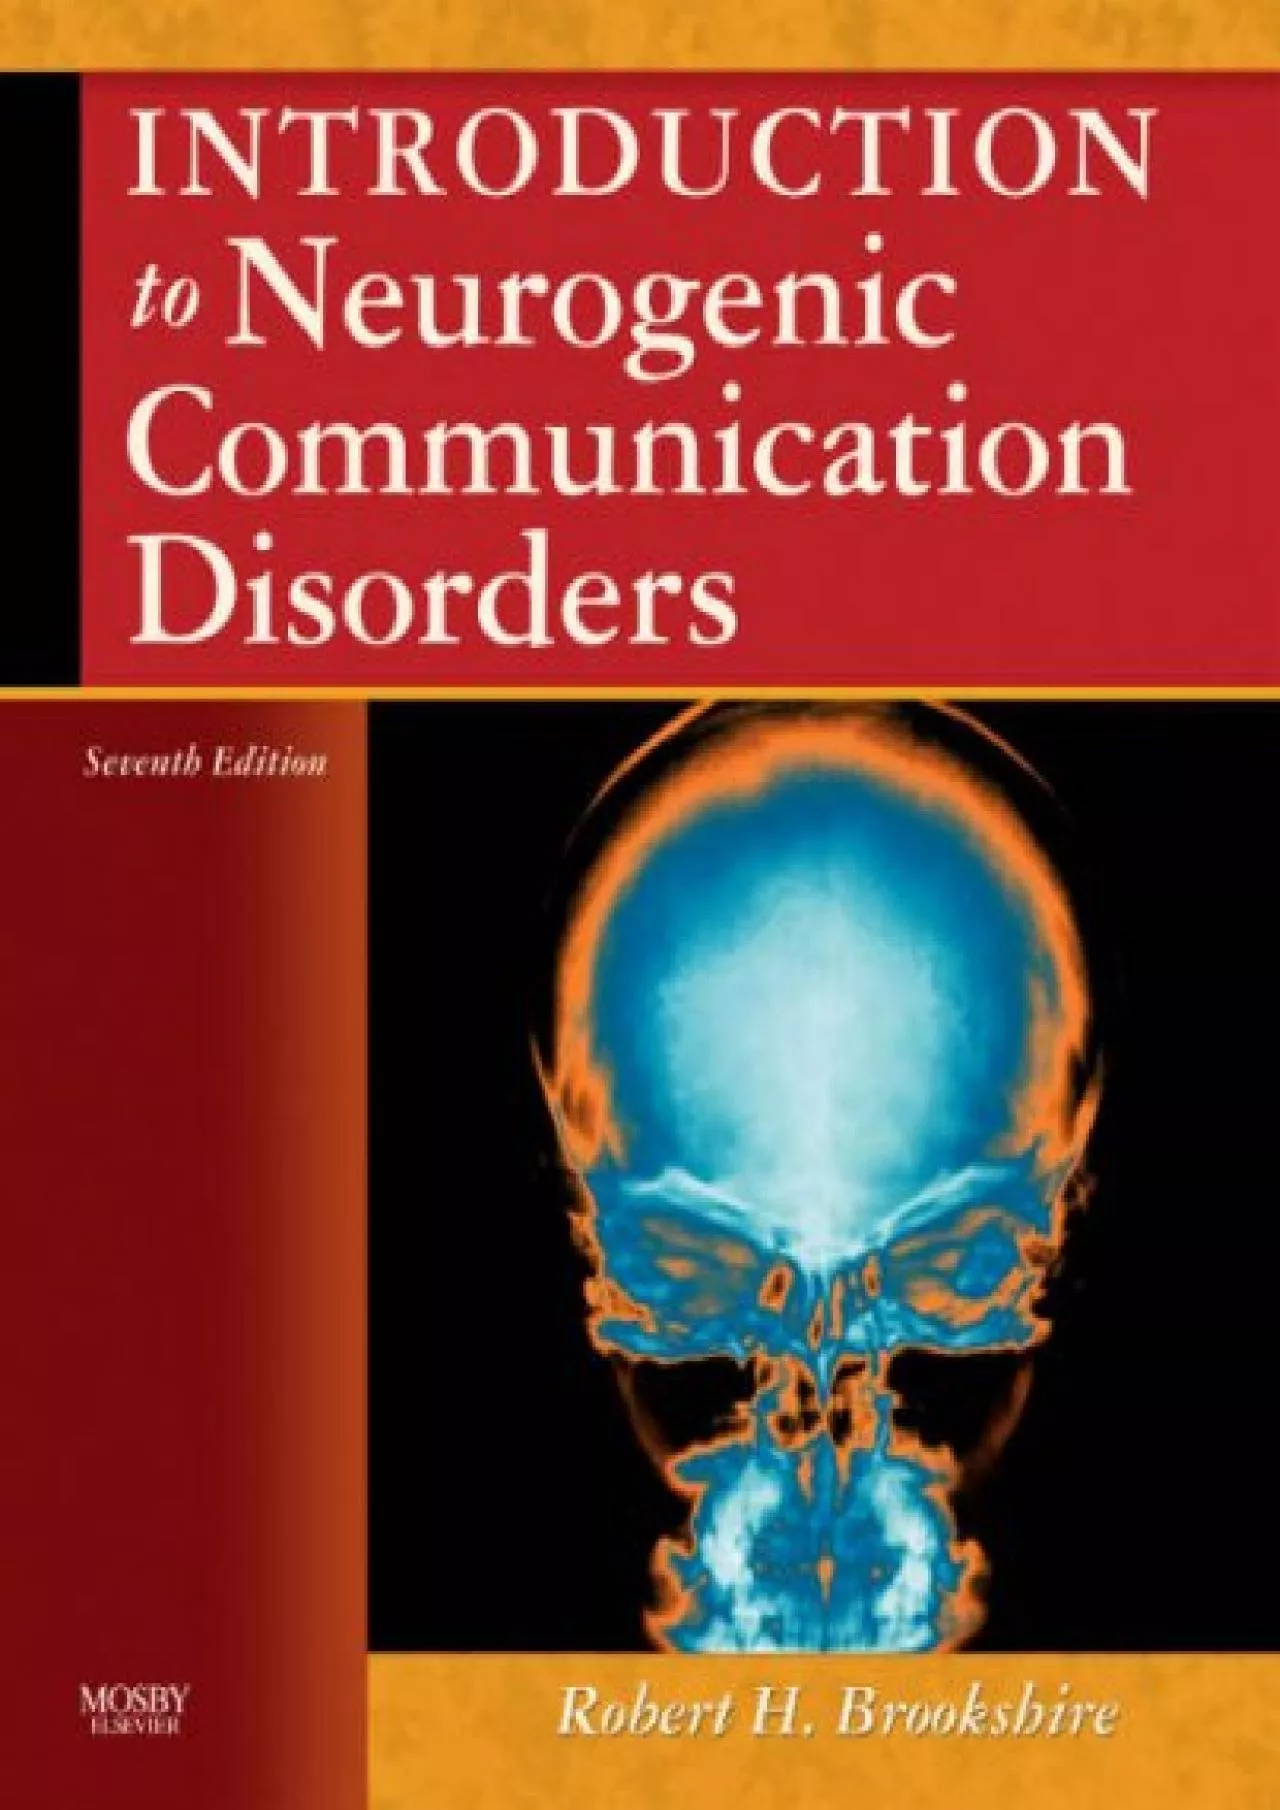 (DOWNLOAD)-Introduction to Neurogenic Communication Disorders